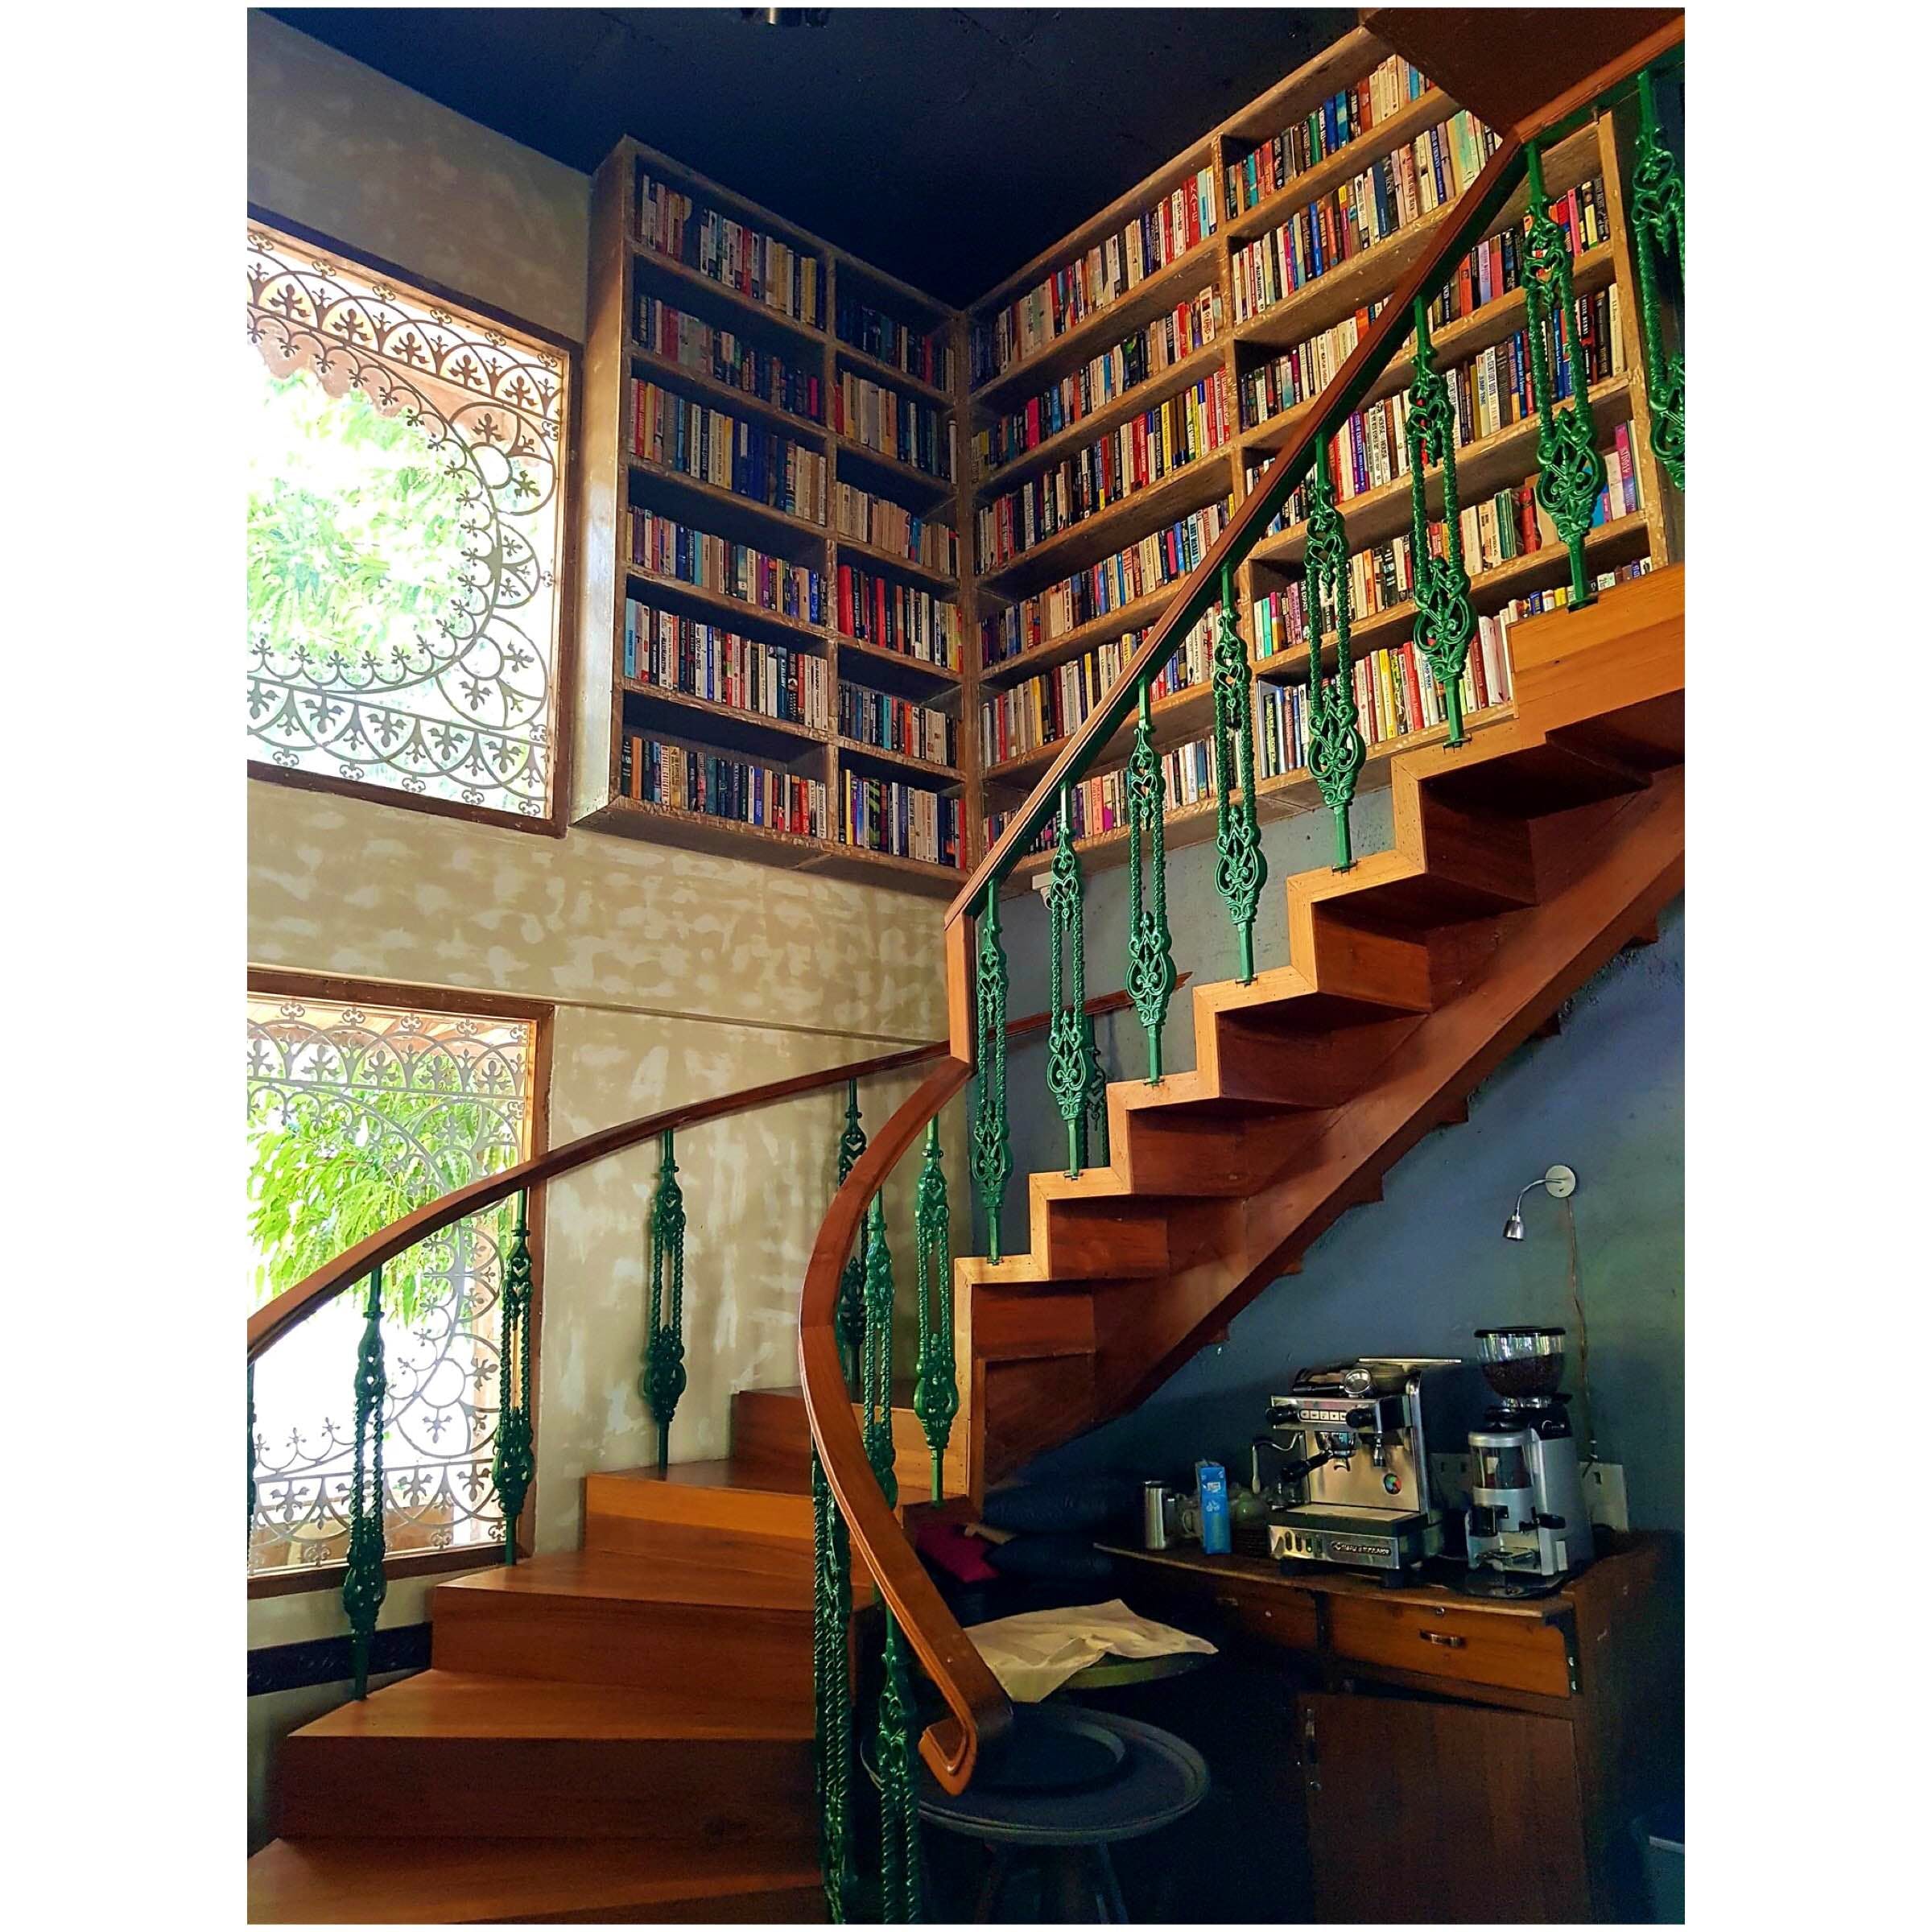 Stairs,Building,Architecture,Shelf,Bookcase,Room,Library,Home,Furniture,Shelving